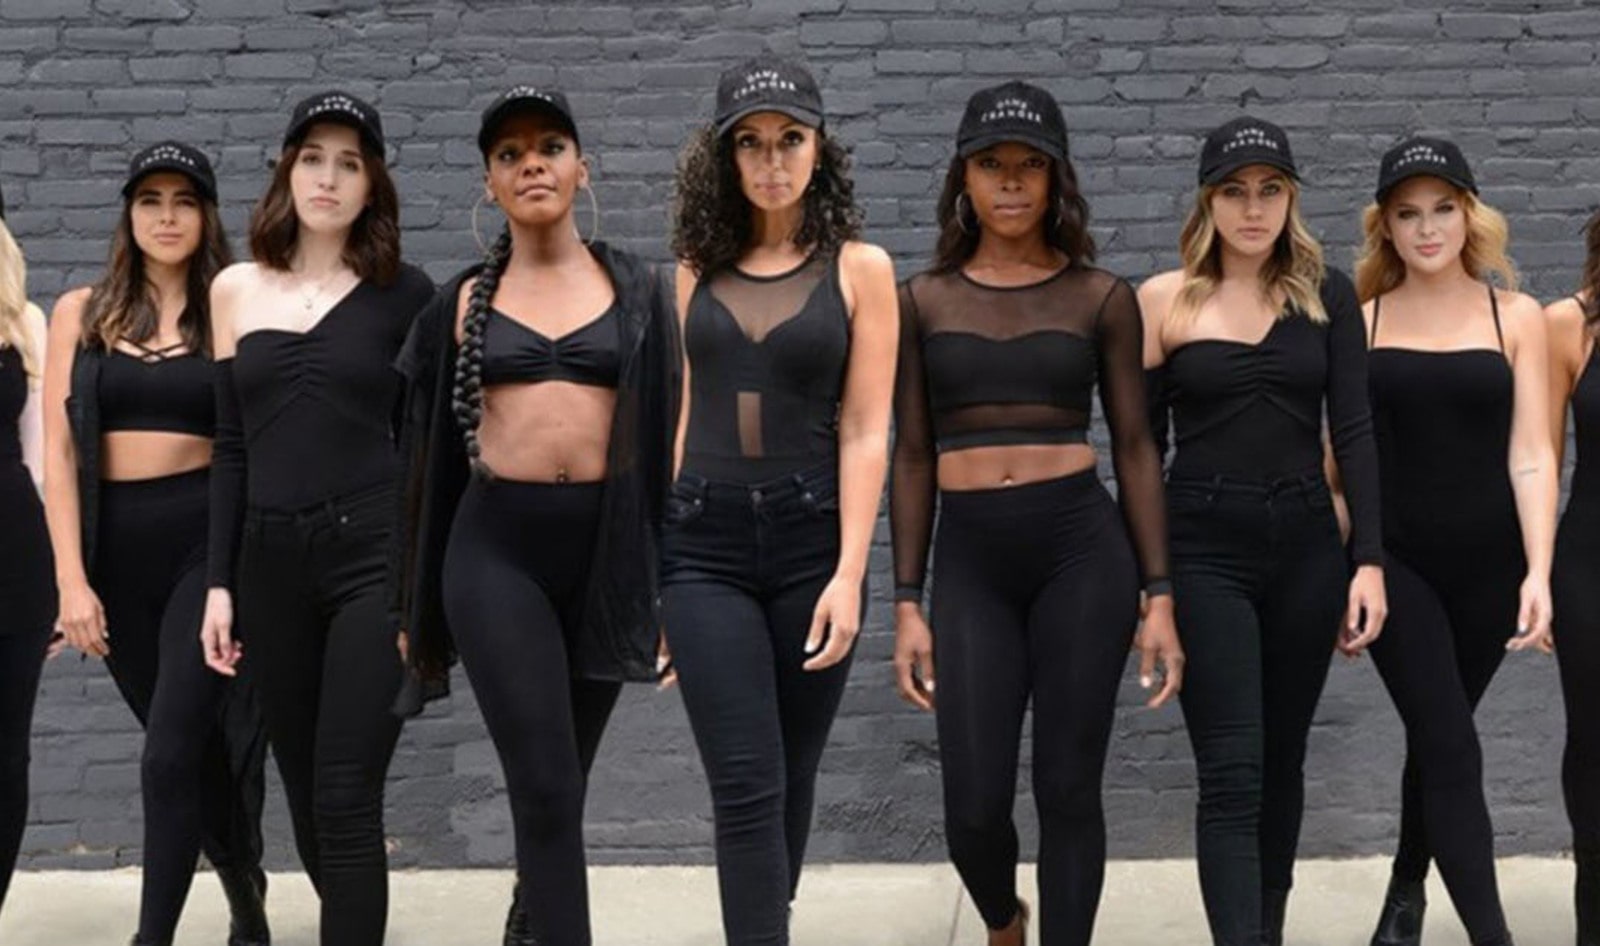 Vegan Power Squad Fights to End Cruelty in Fashion